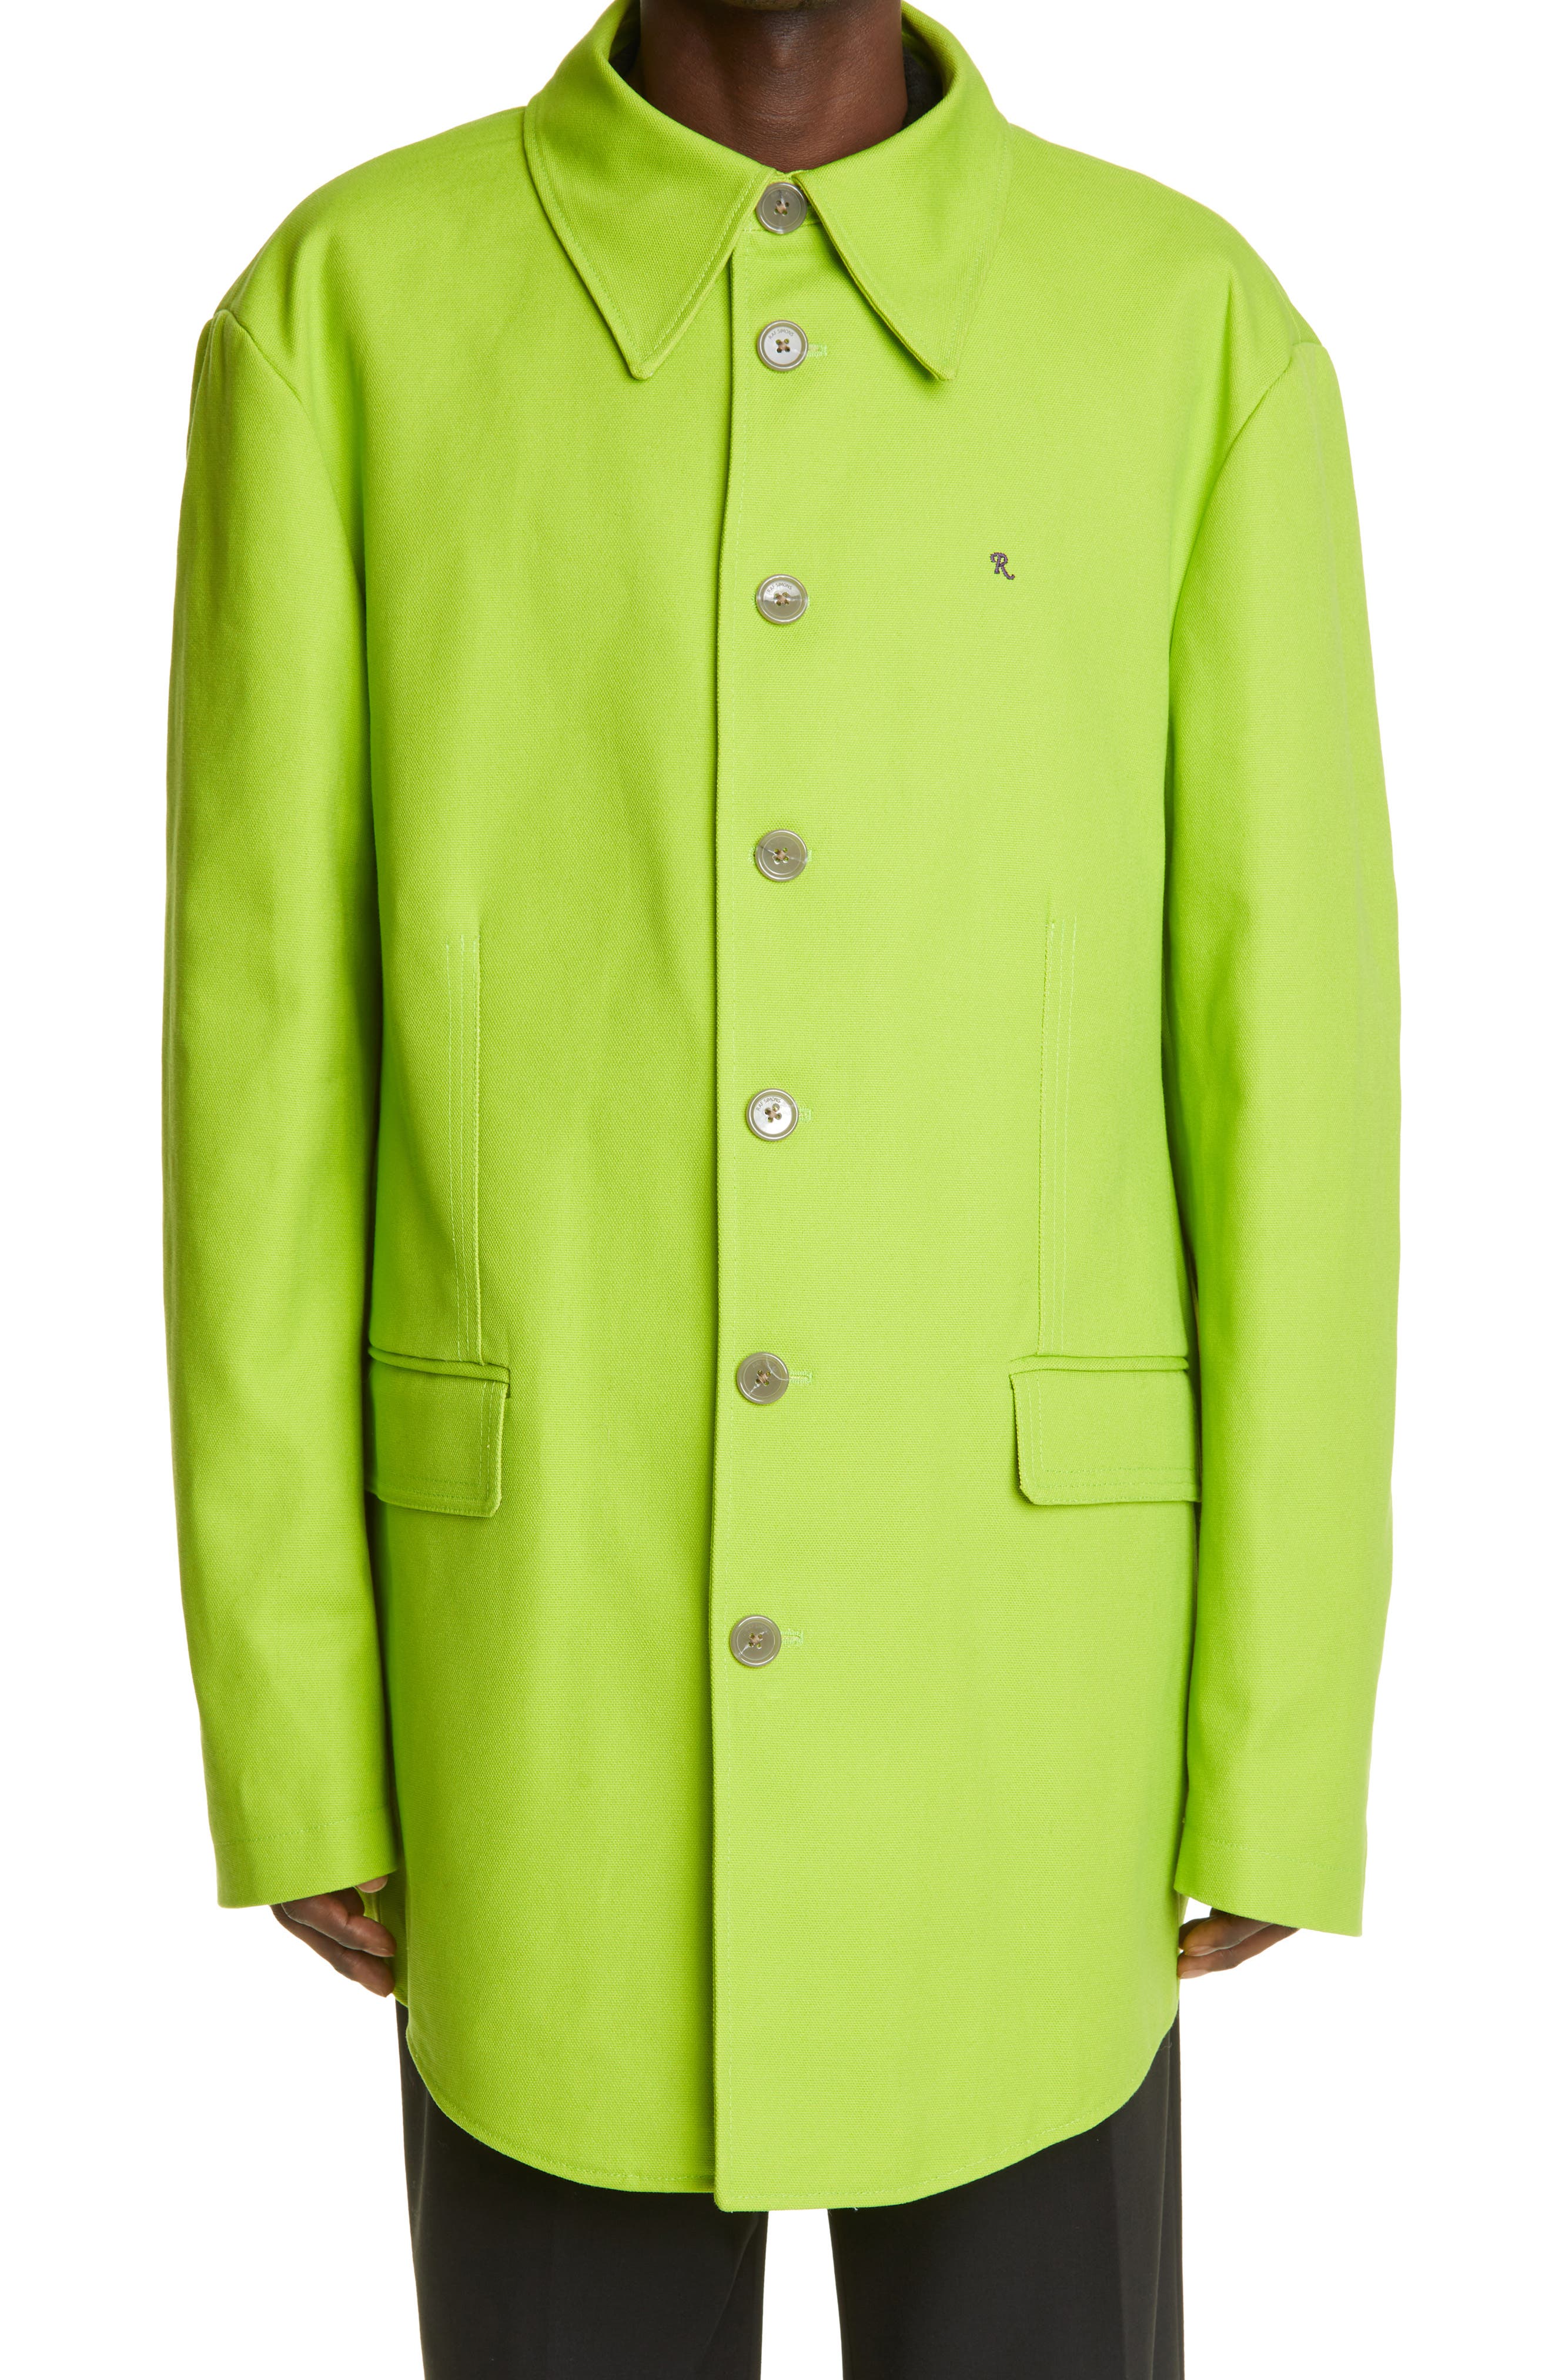 Raf Simons Oversize Cotton Jacket in Green at Nordstrom, Size 38 Us